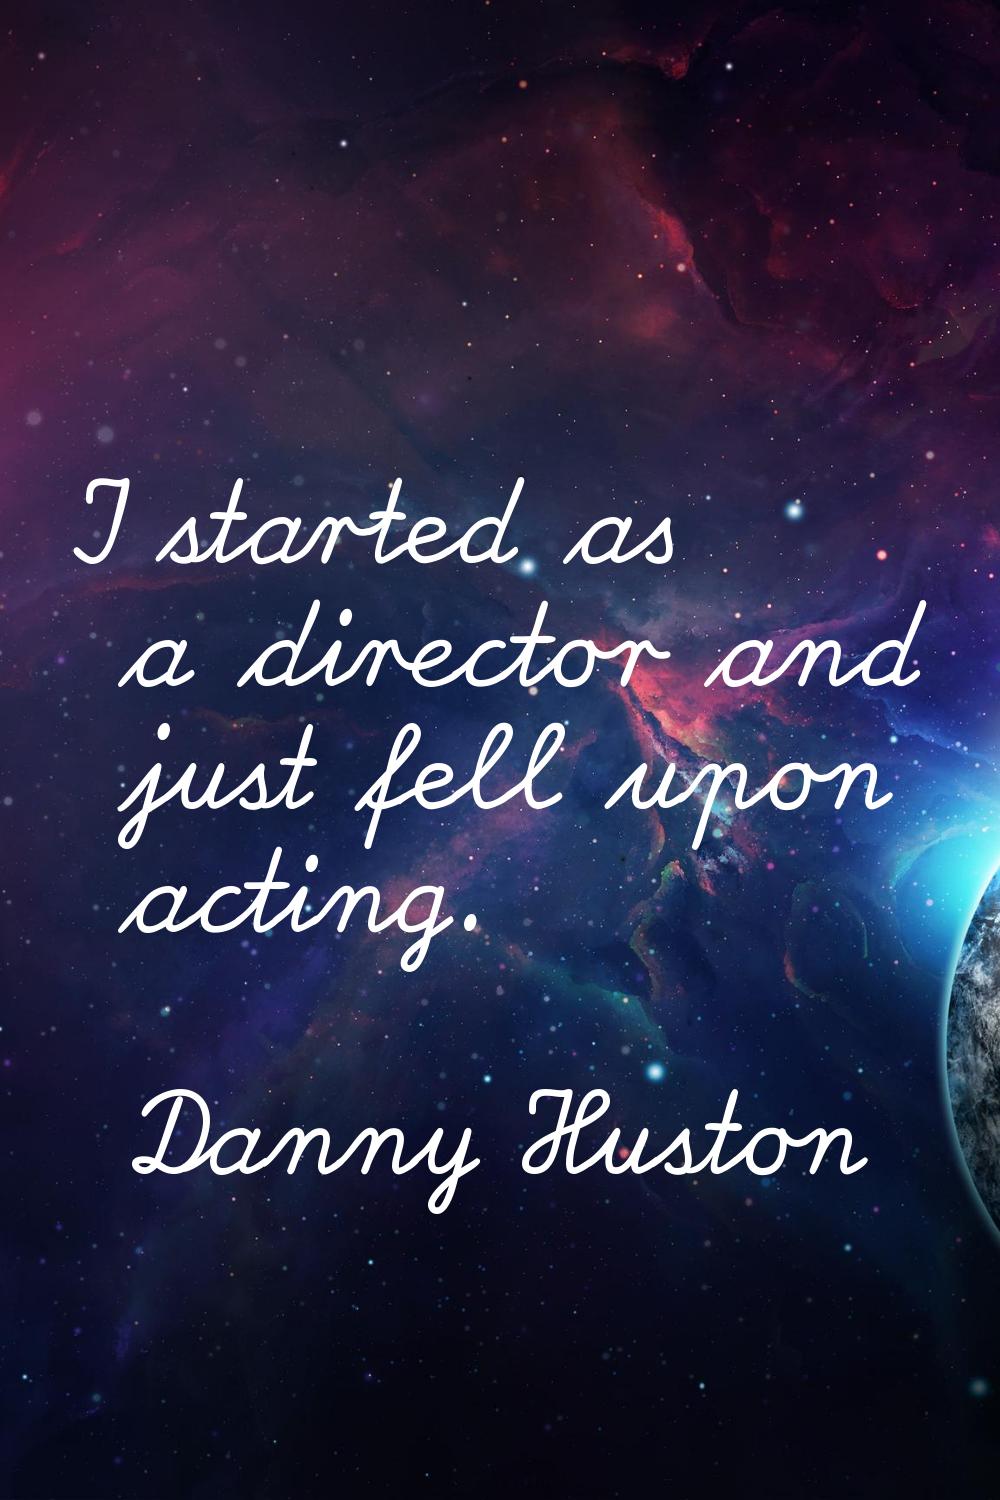 I started as a director and just fell upon acting.